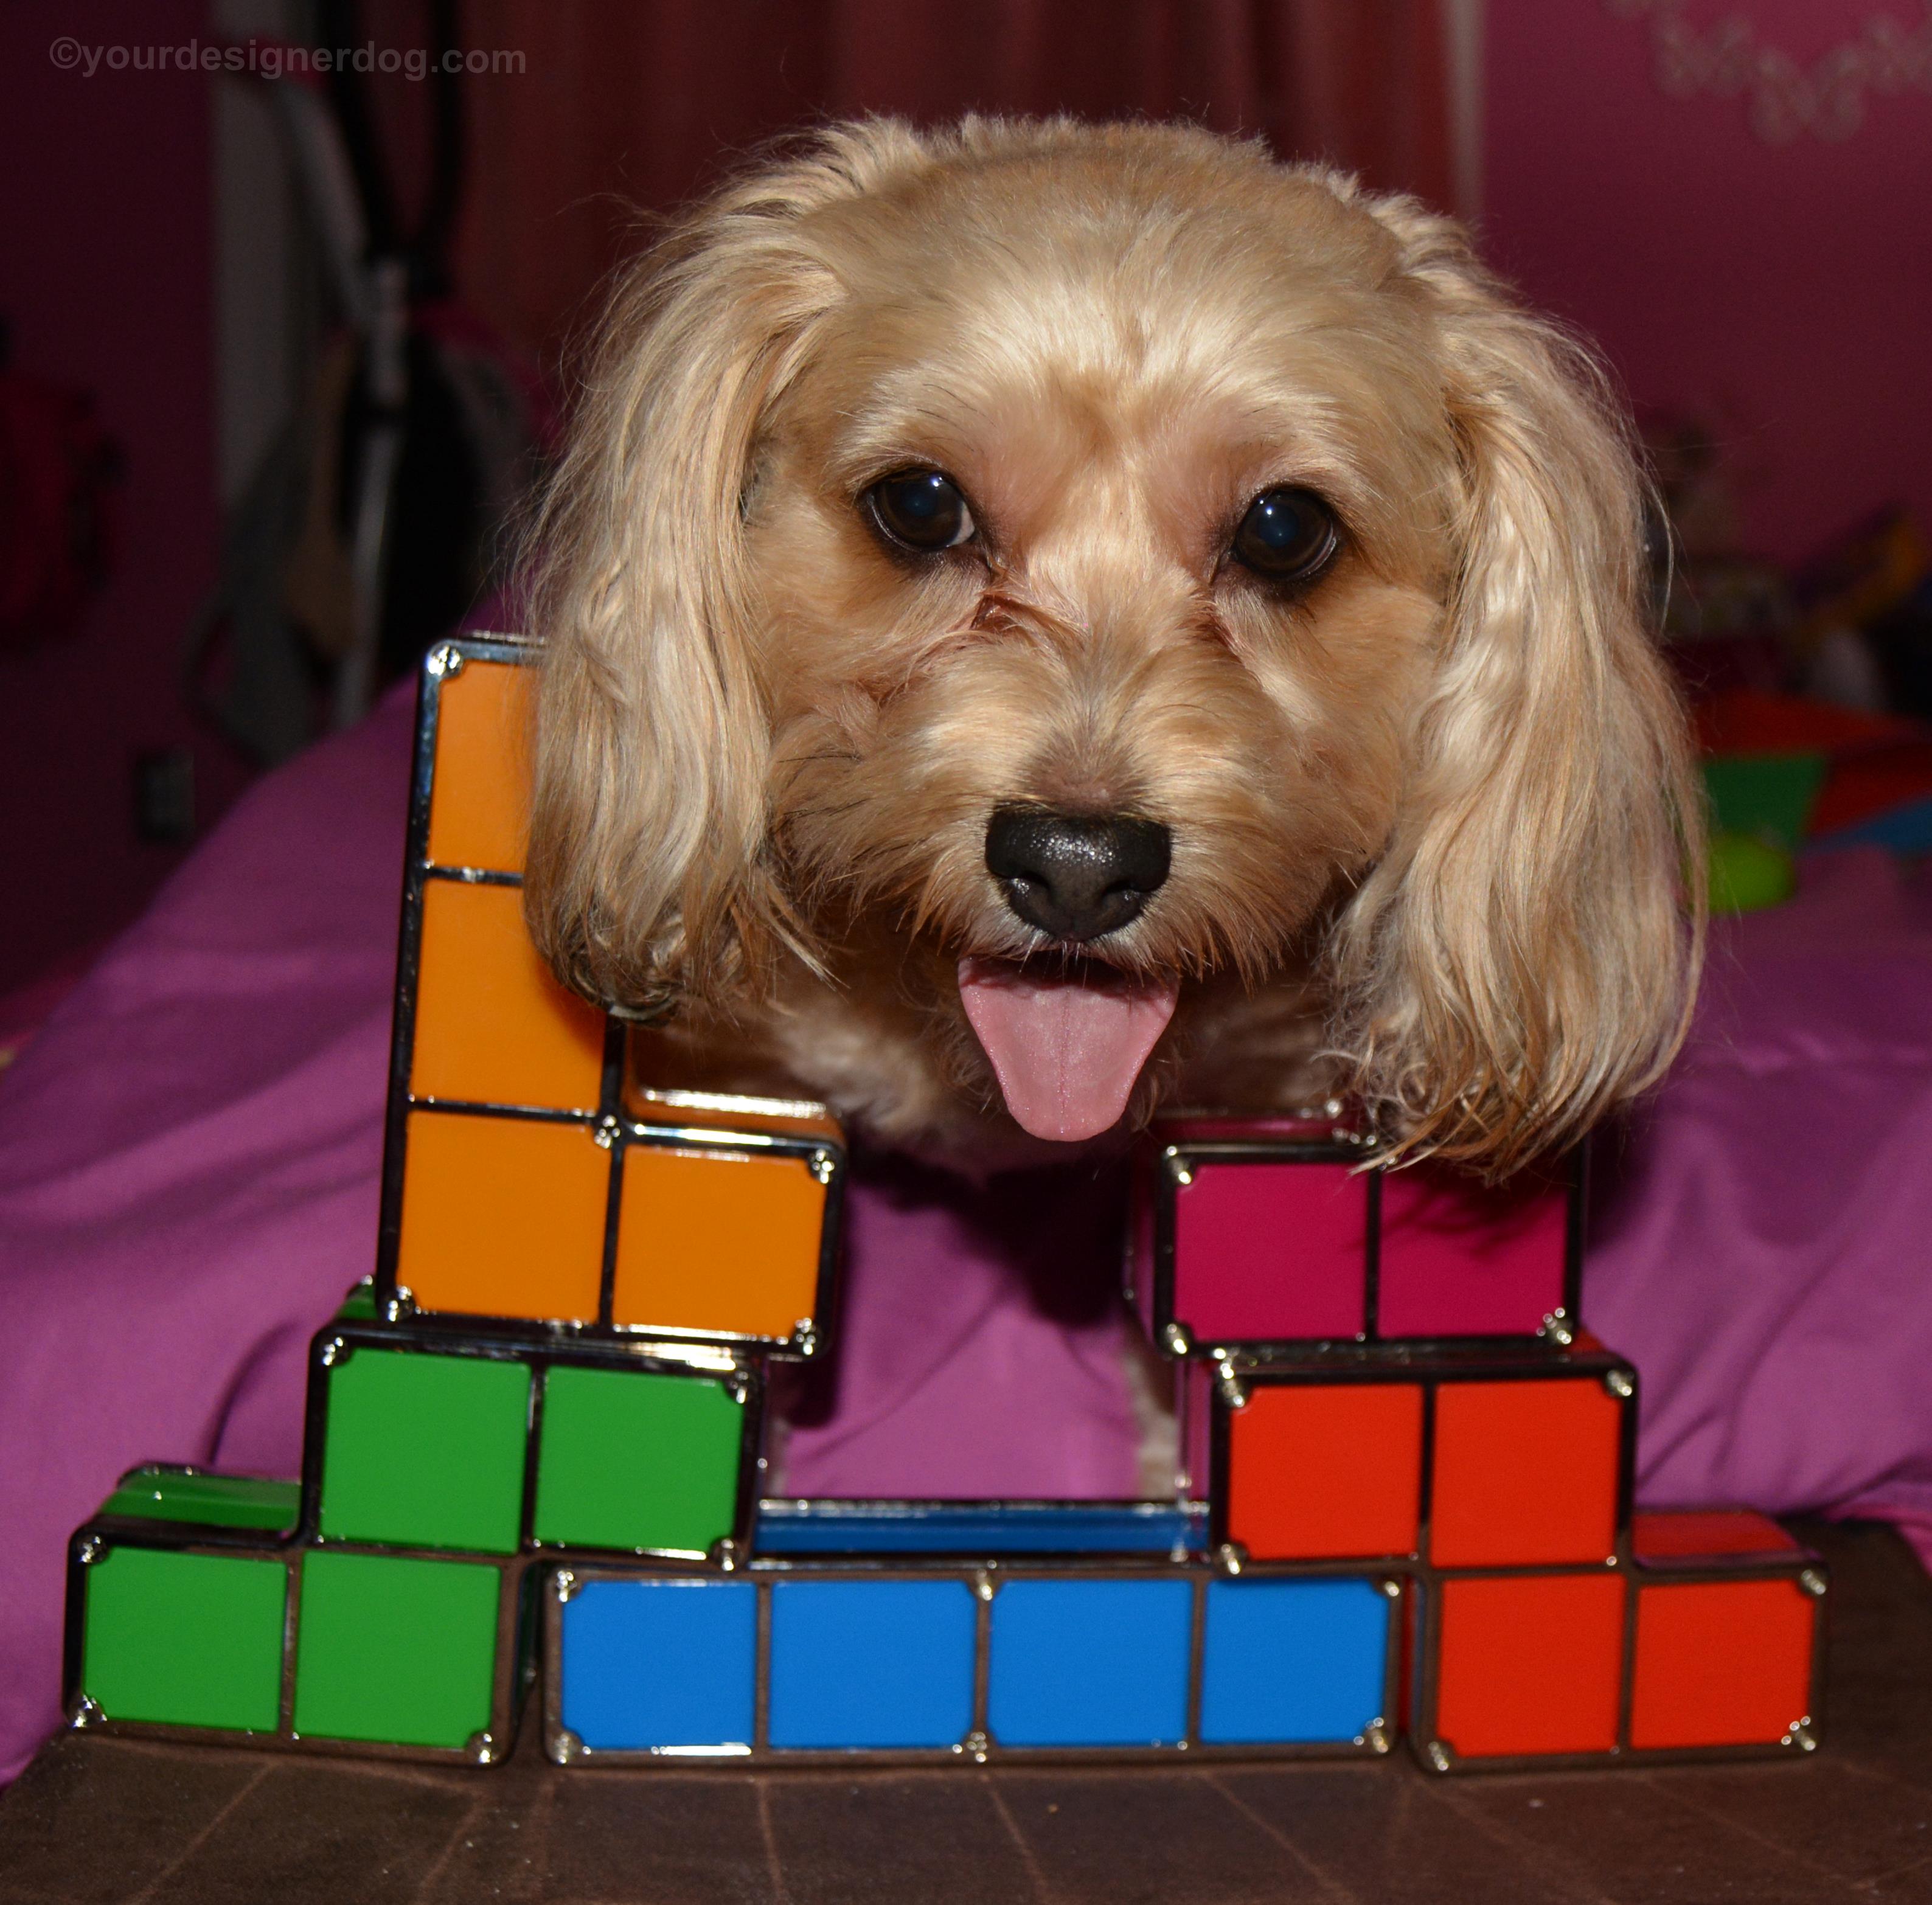 dogs, designer dogs, Yorkipoo, yorkie poo, tetris, tongue out